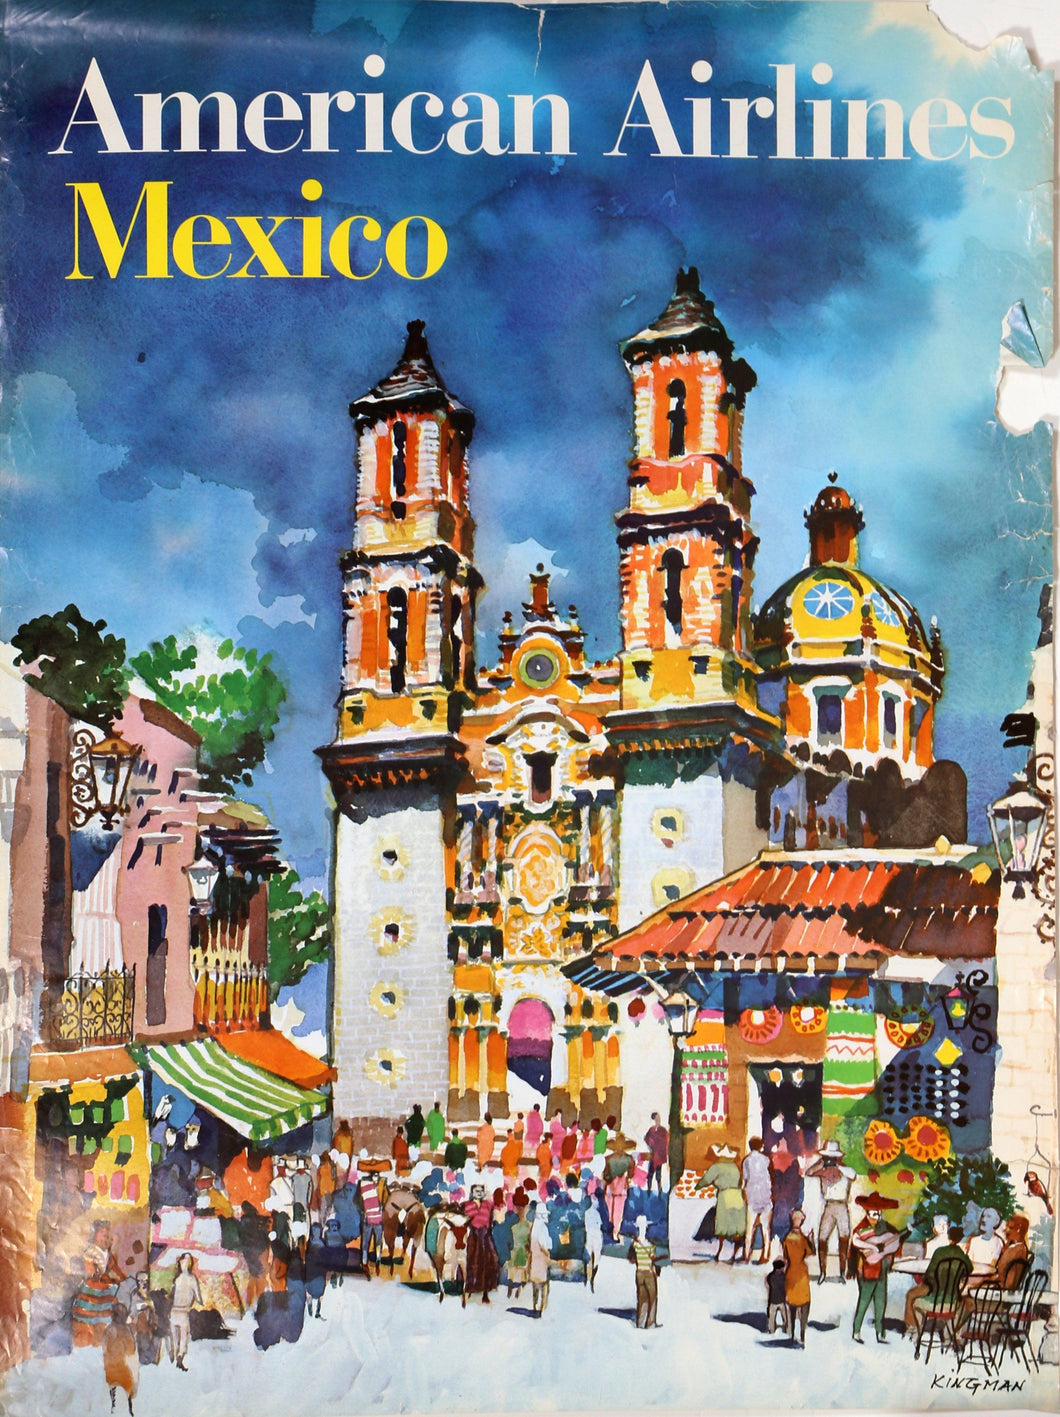 American Airlines - Mexico Poster | Dong Kingman,{{product.type}}